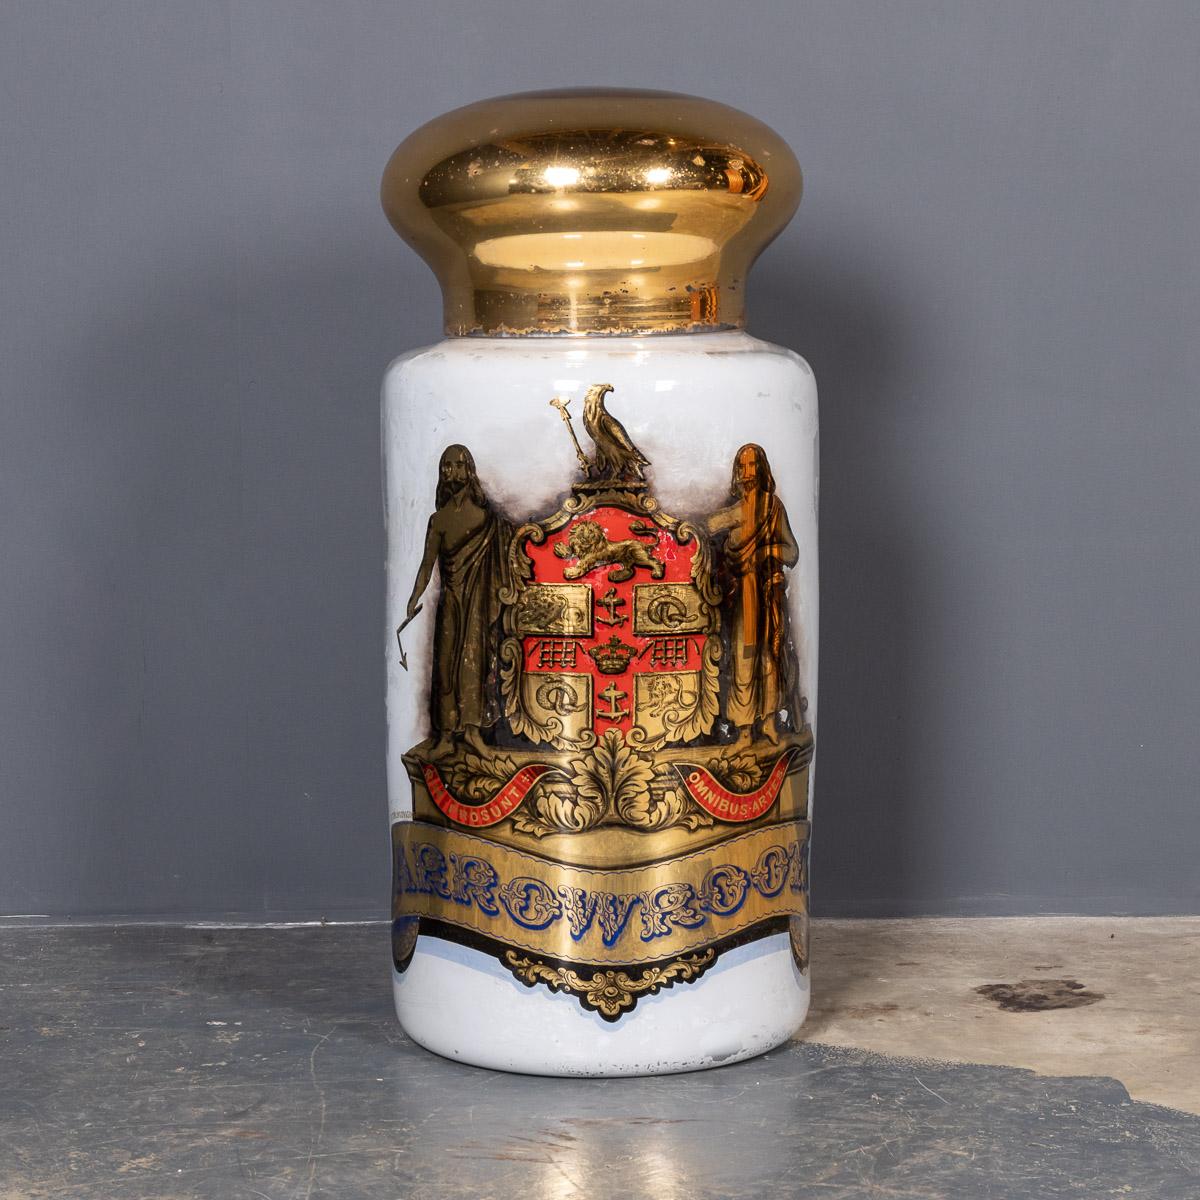 Antique 19th century Victorian handblown glass & reverse hand painted pharmacy jar with polished brass cover.

Measures: Height: 74cm
Width: 33cm.